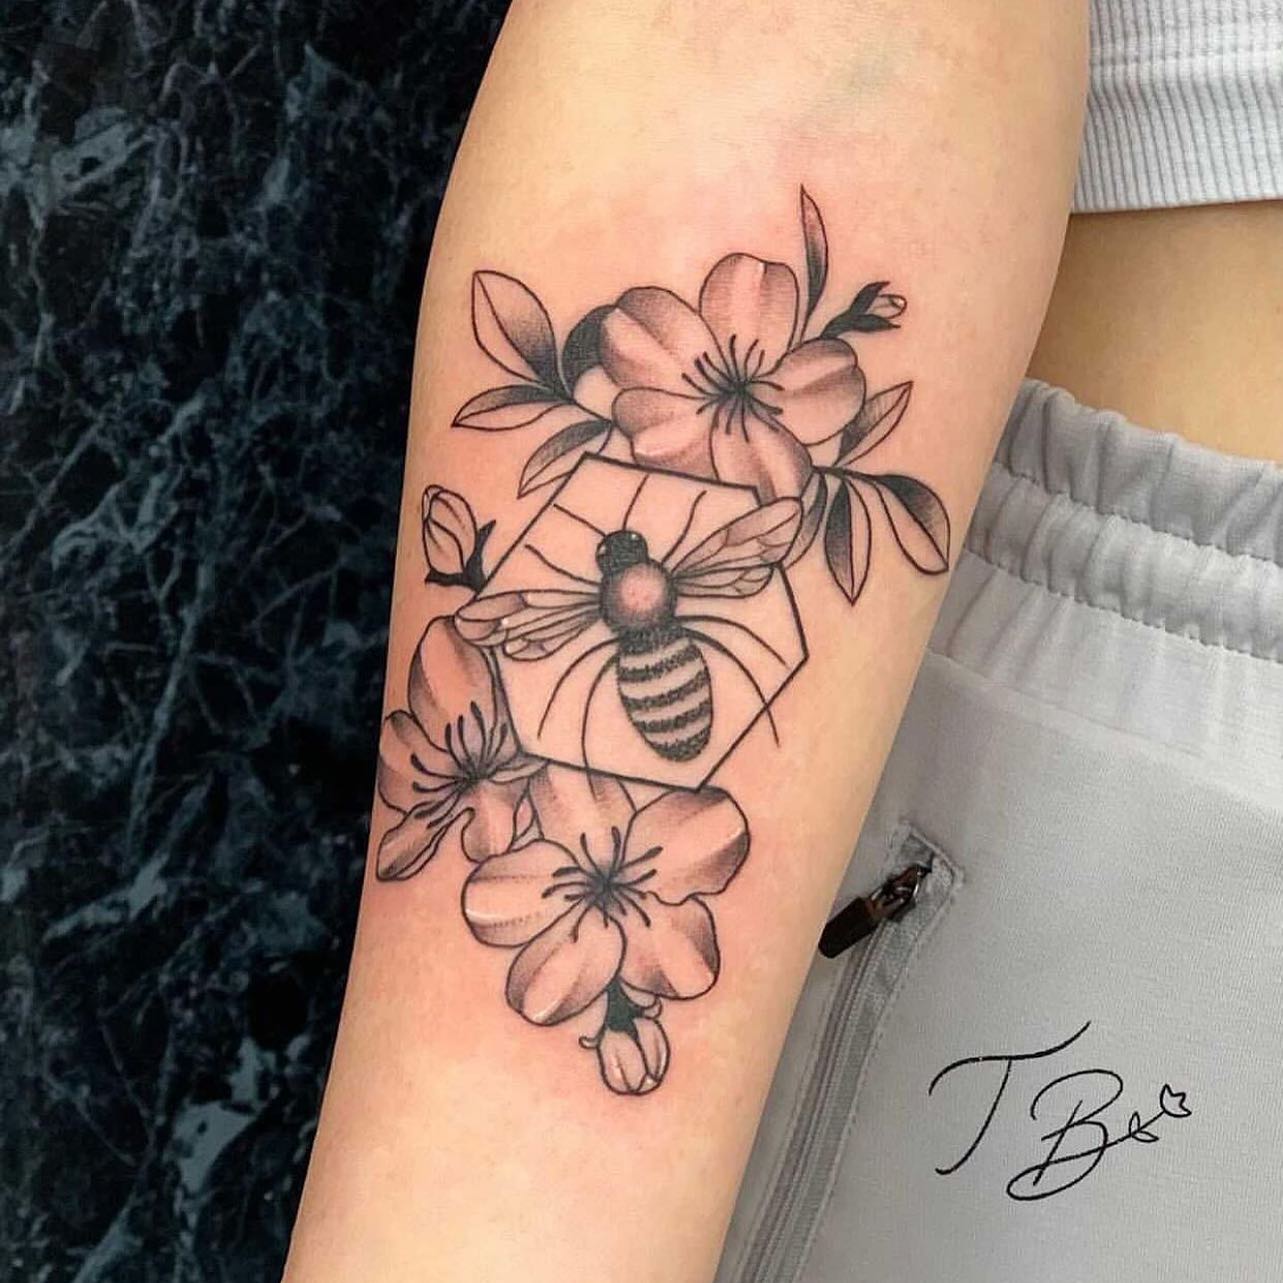 Sweet little bumble bee by the thaisblanc 🌸🐝

If you would like to get tattooed, then please fill out the tattoo enquiry form on our website 💫

                         totaltattoo barber_dts easytattoo_uk eternalink dynamiccolor lockdownneedle stencilstuff       